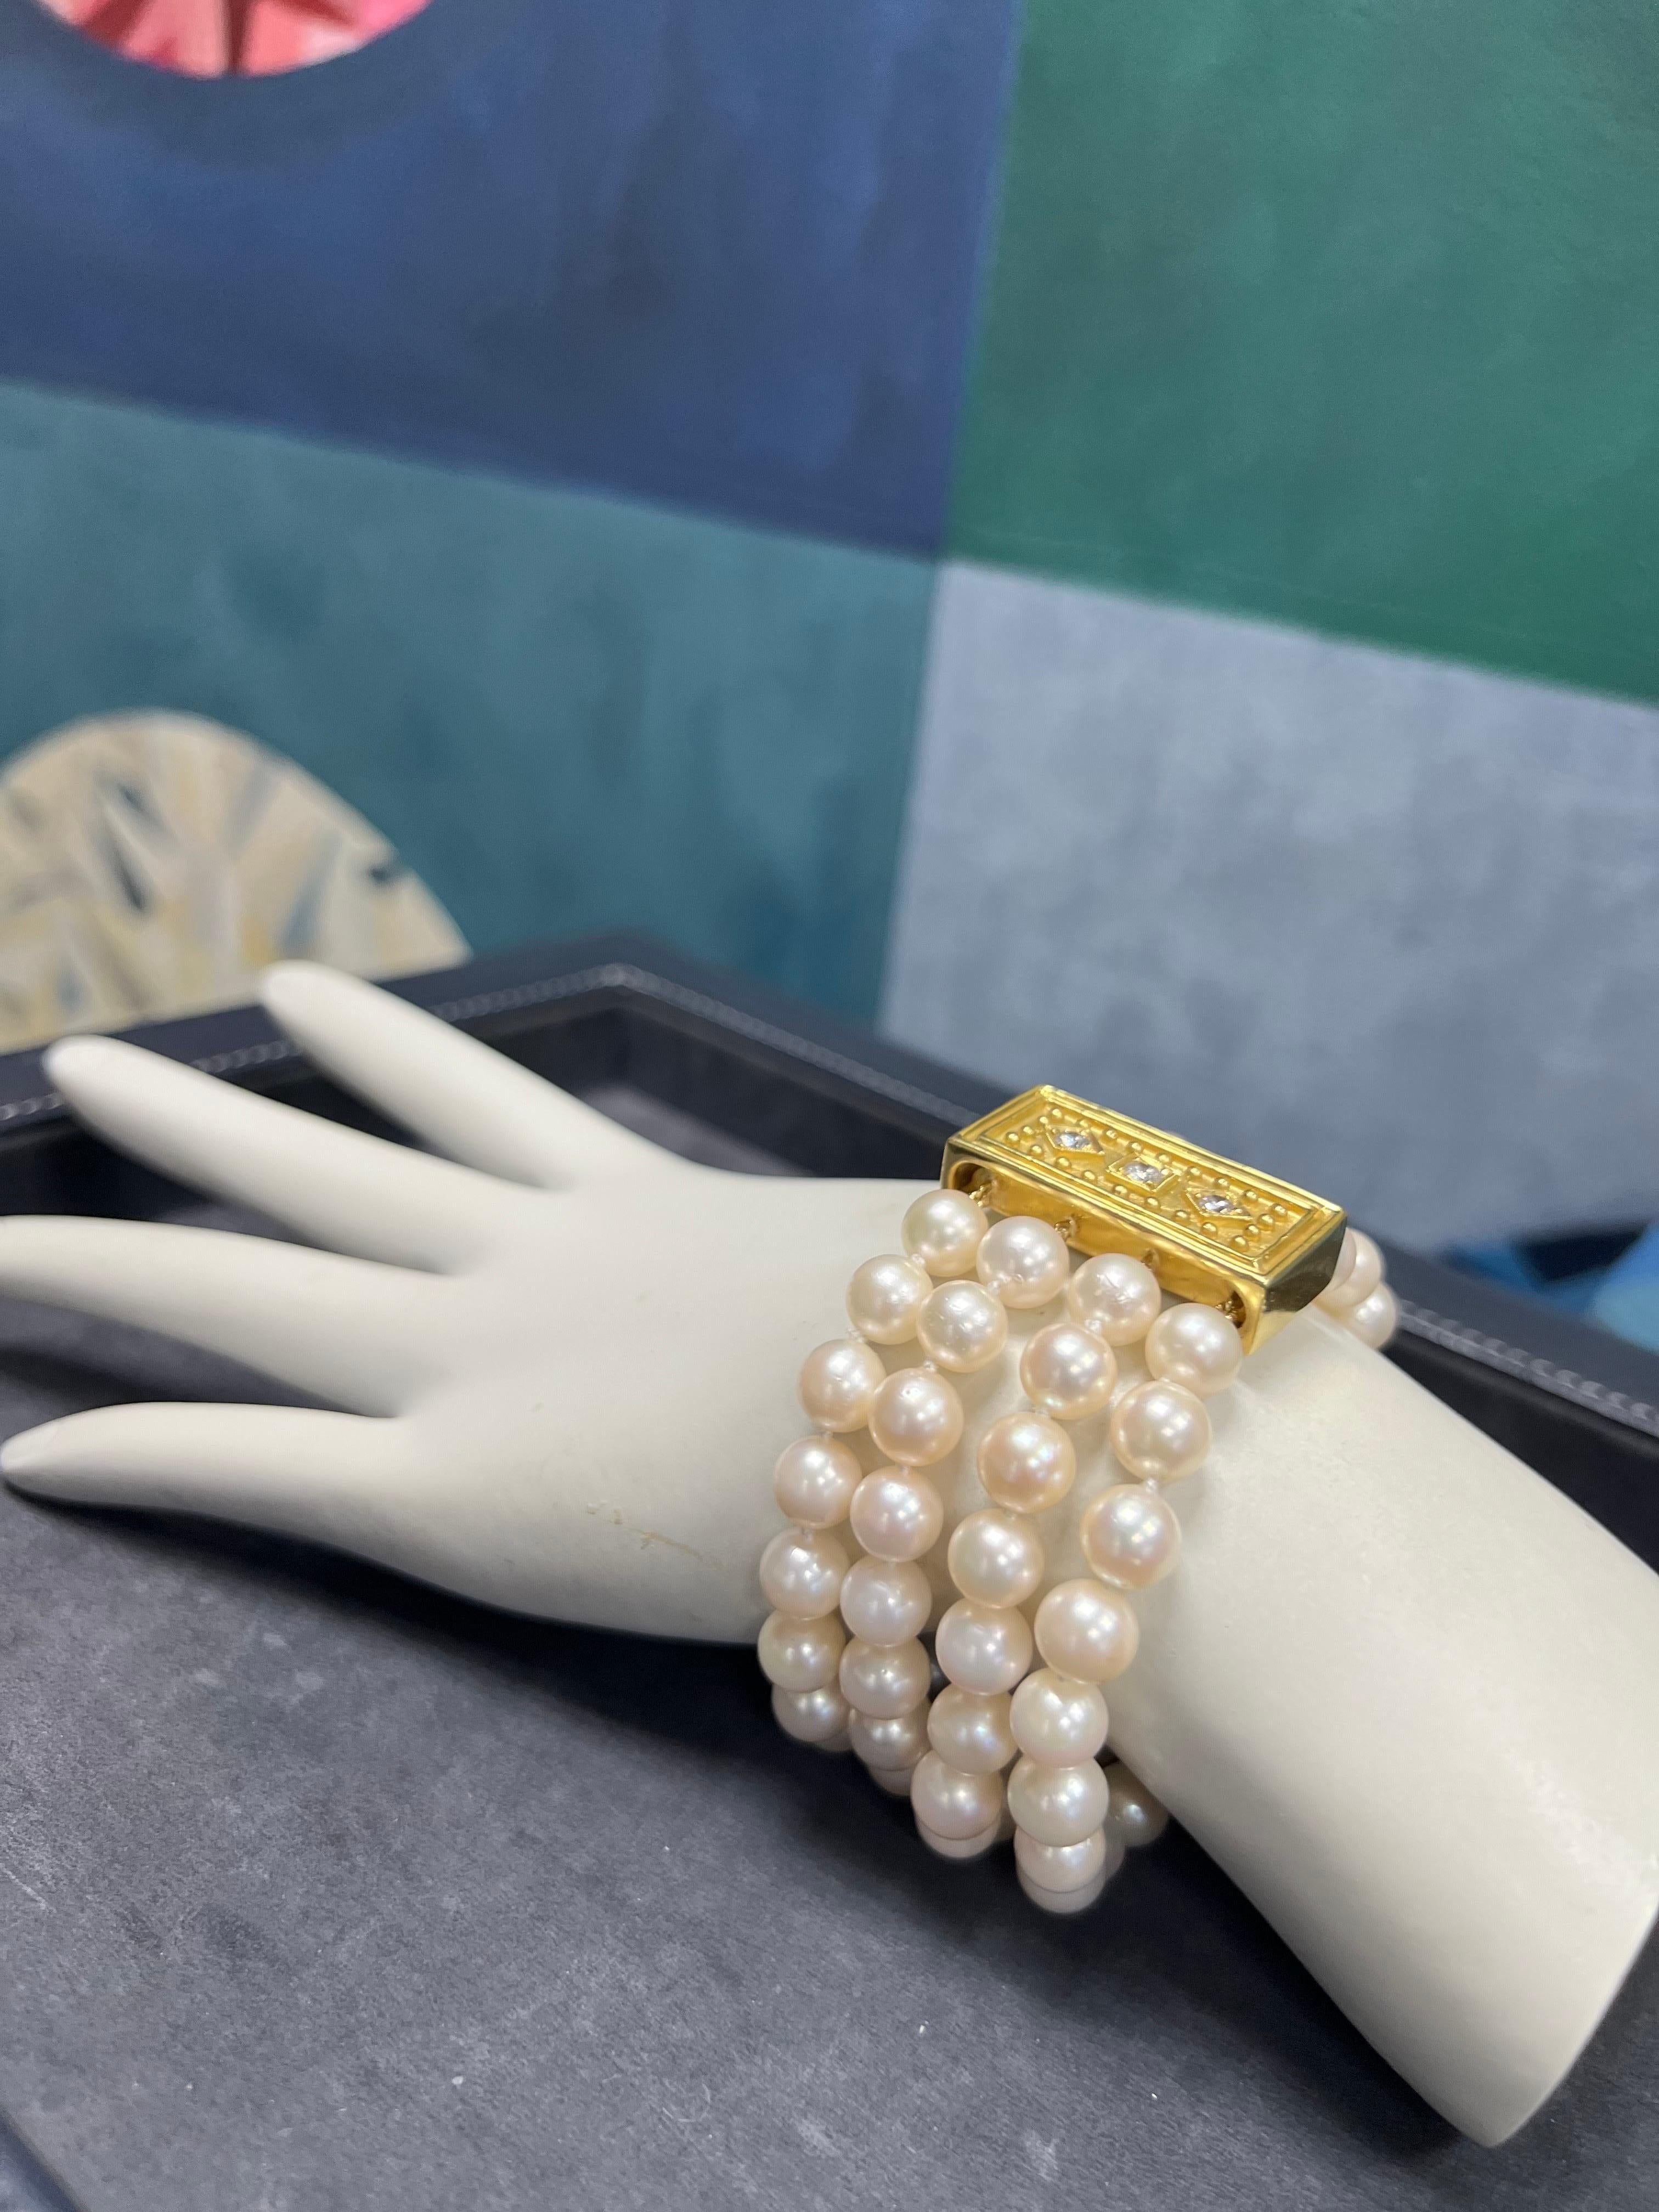 A magnificent four strand cultured Akoya pearl bracelet, Circa 1980. Each of the 80 pearls measure approximately 7.5mm in diameter and have great luster and orient. There are very subtle surface blemishes, but nothing takes away from the beauty of